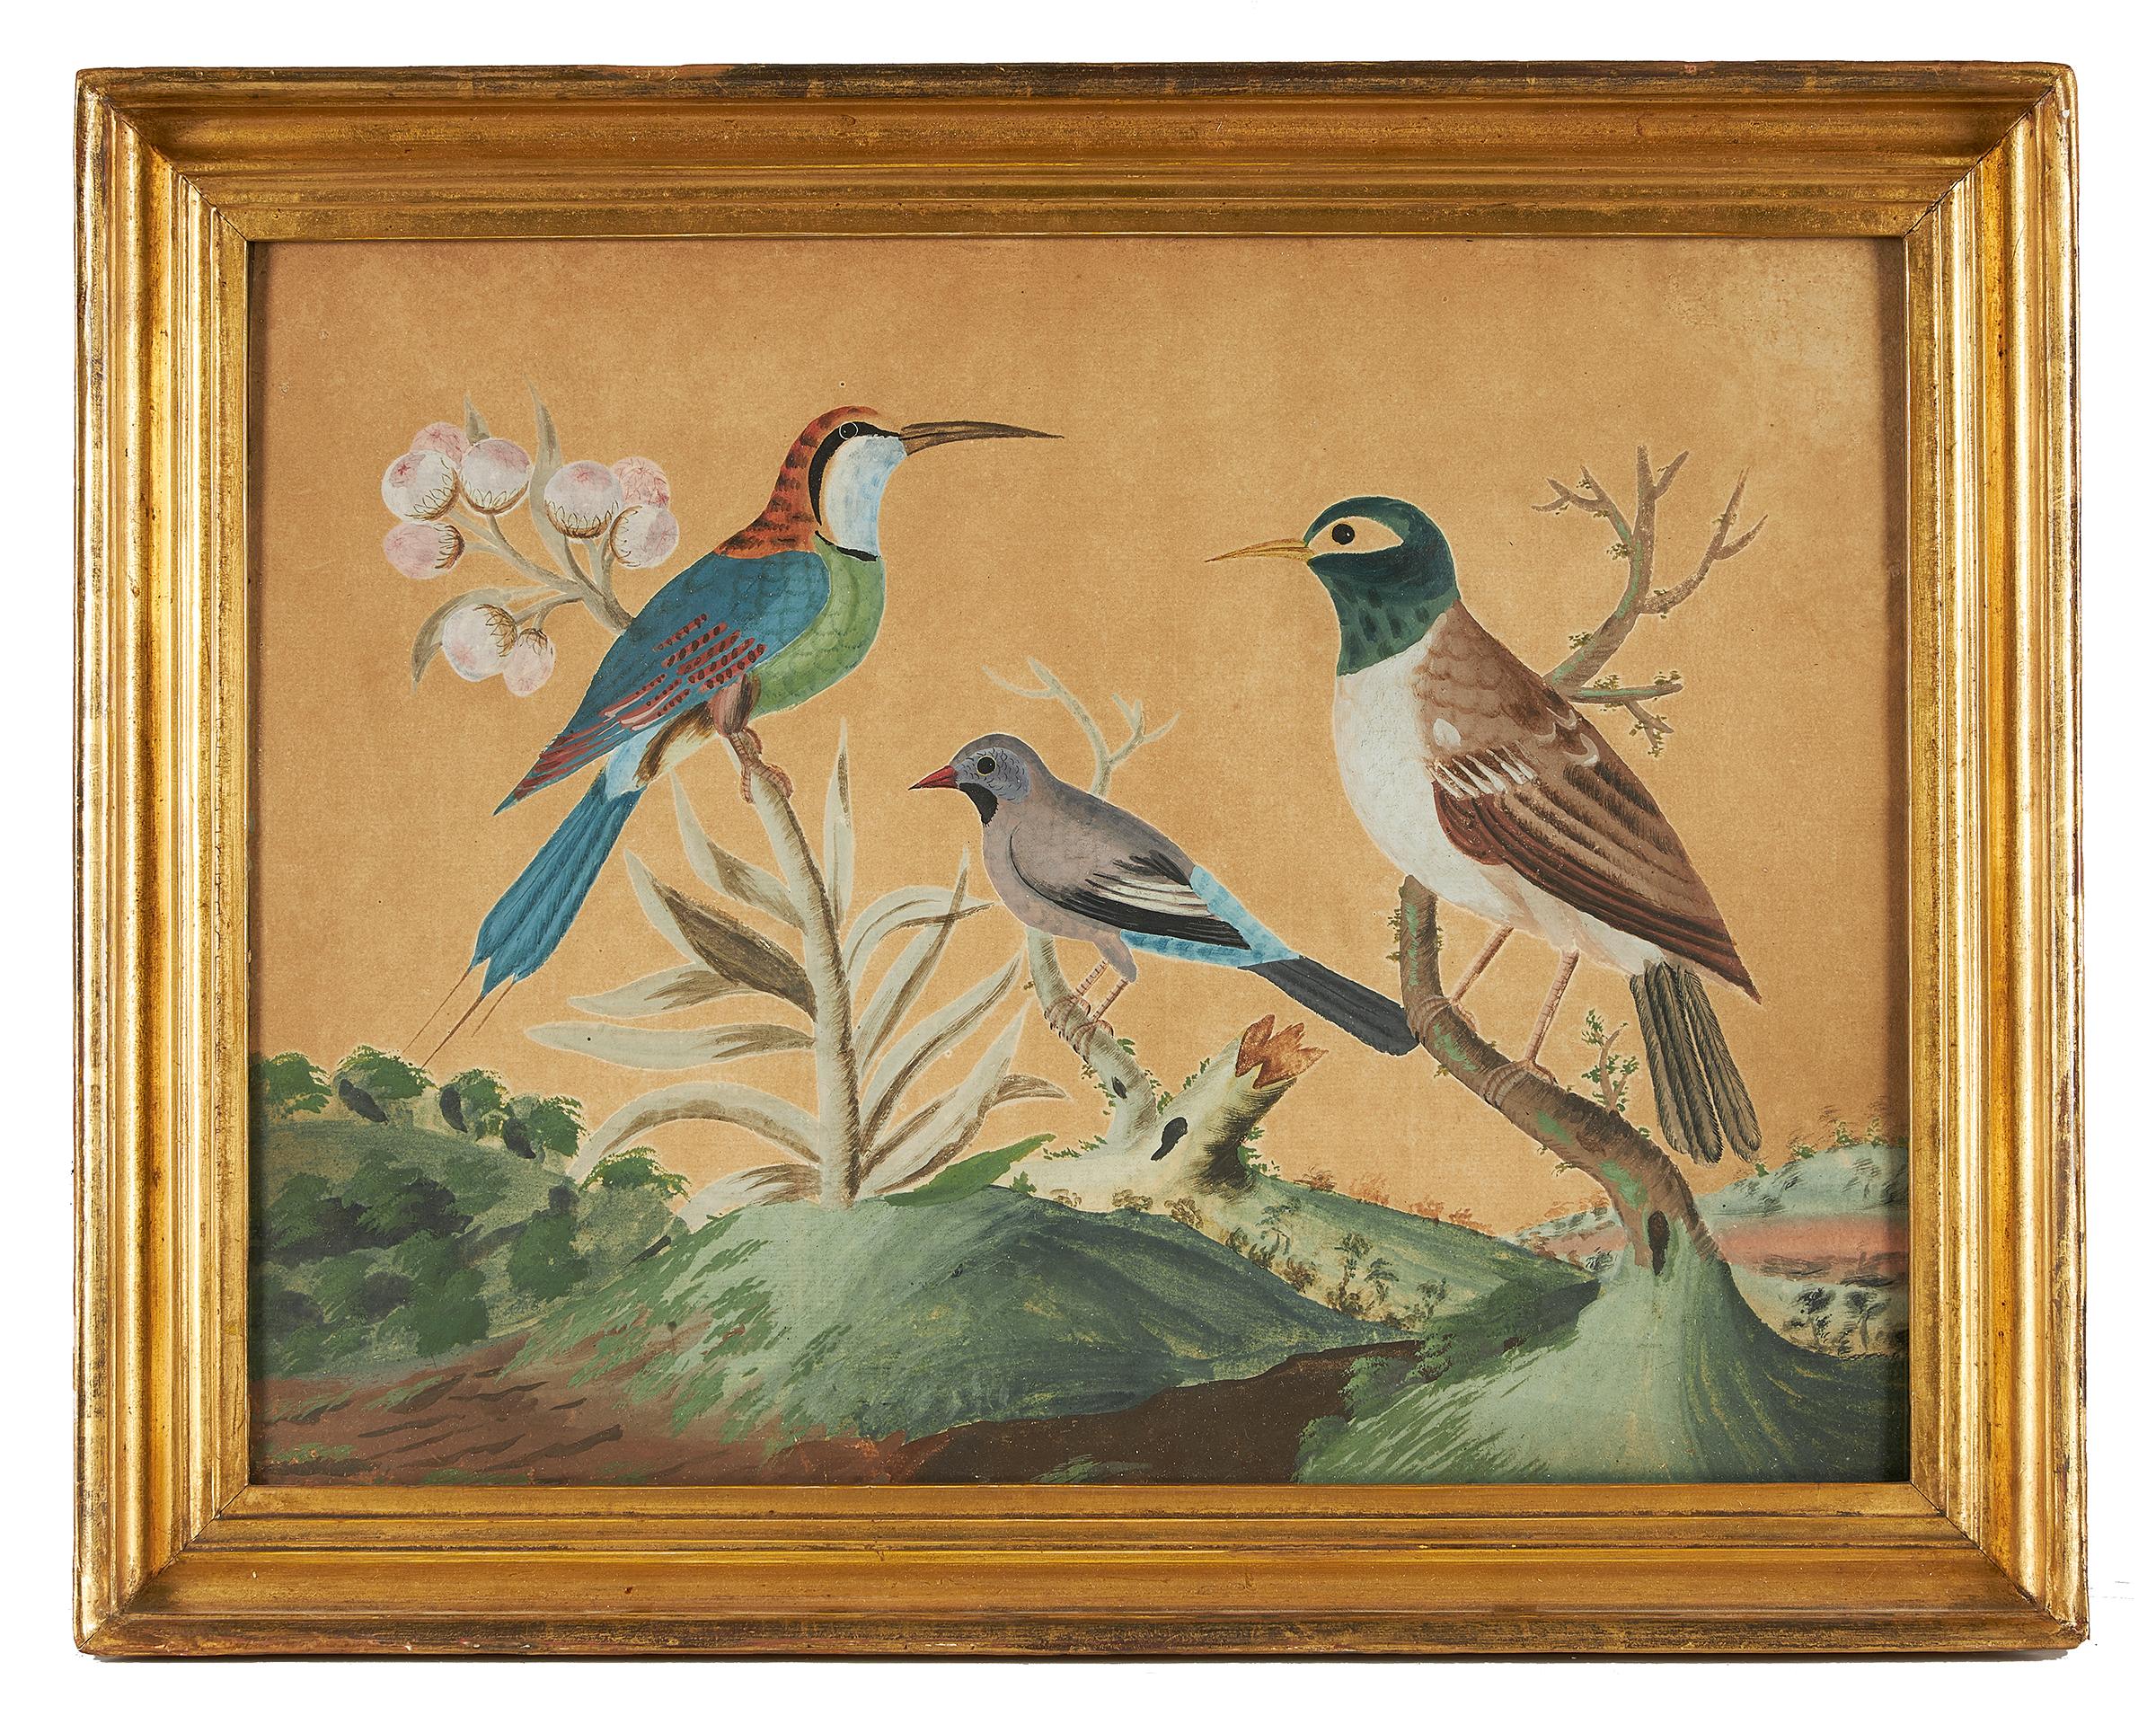 Samuel Dixon (Irish, 1669-1769), circa 1775, 'A green-Indian bee-eater, Brazilian Finch and a black and white Indian Starling', from the basso relievo set 'Foreign and Domestick Birds', a tergo with fragmented labelled dedication to 'the Lady